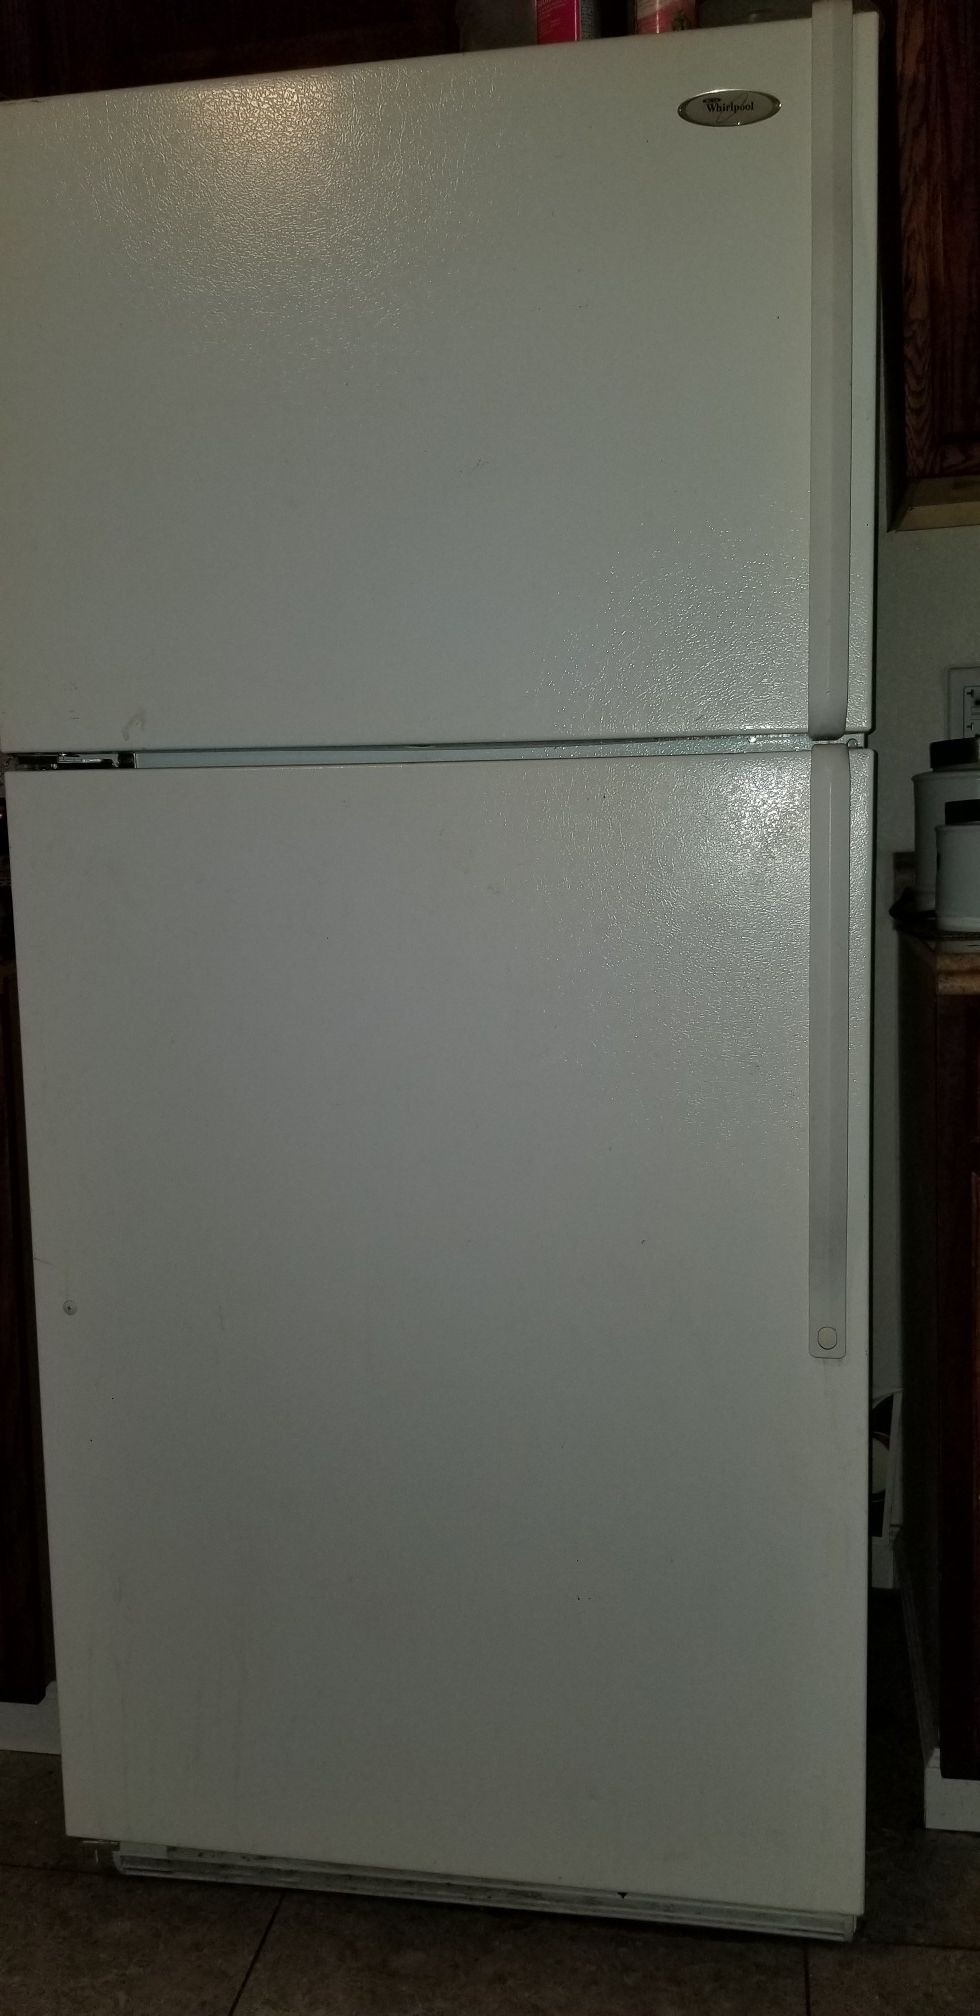 Whirlpool refrigerator working good👍 i dont deliver